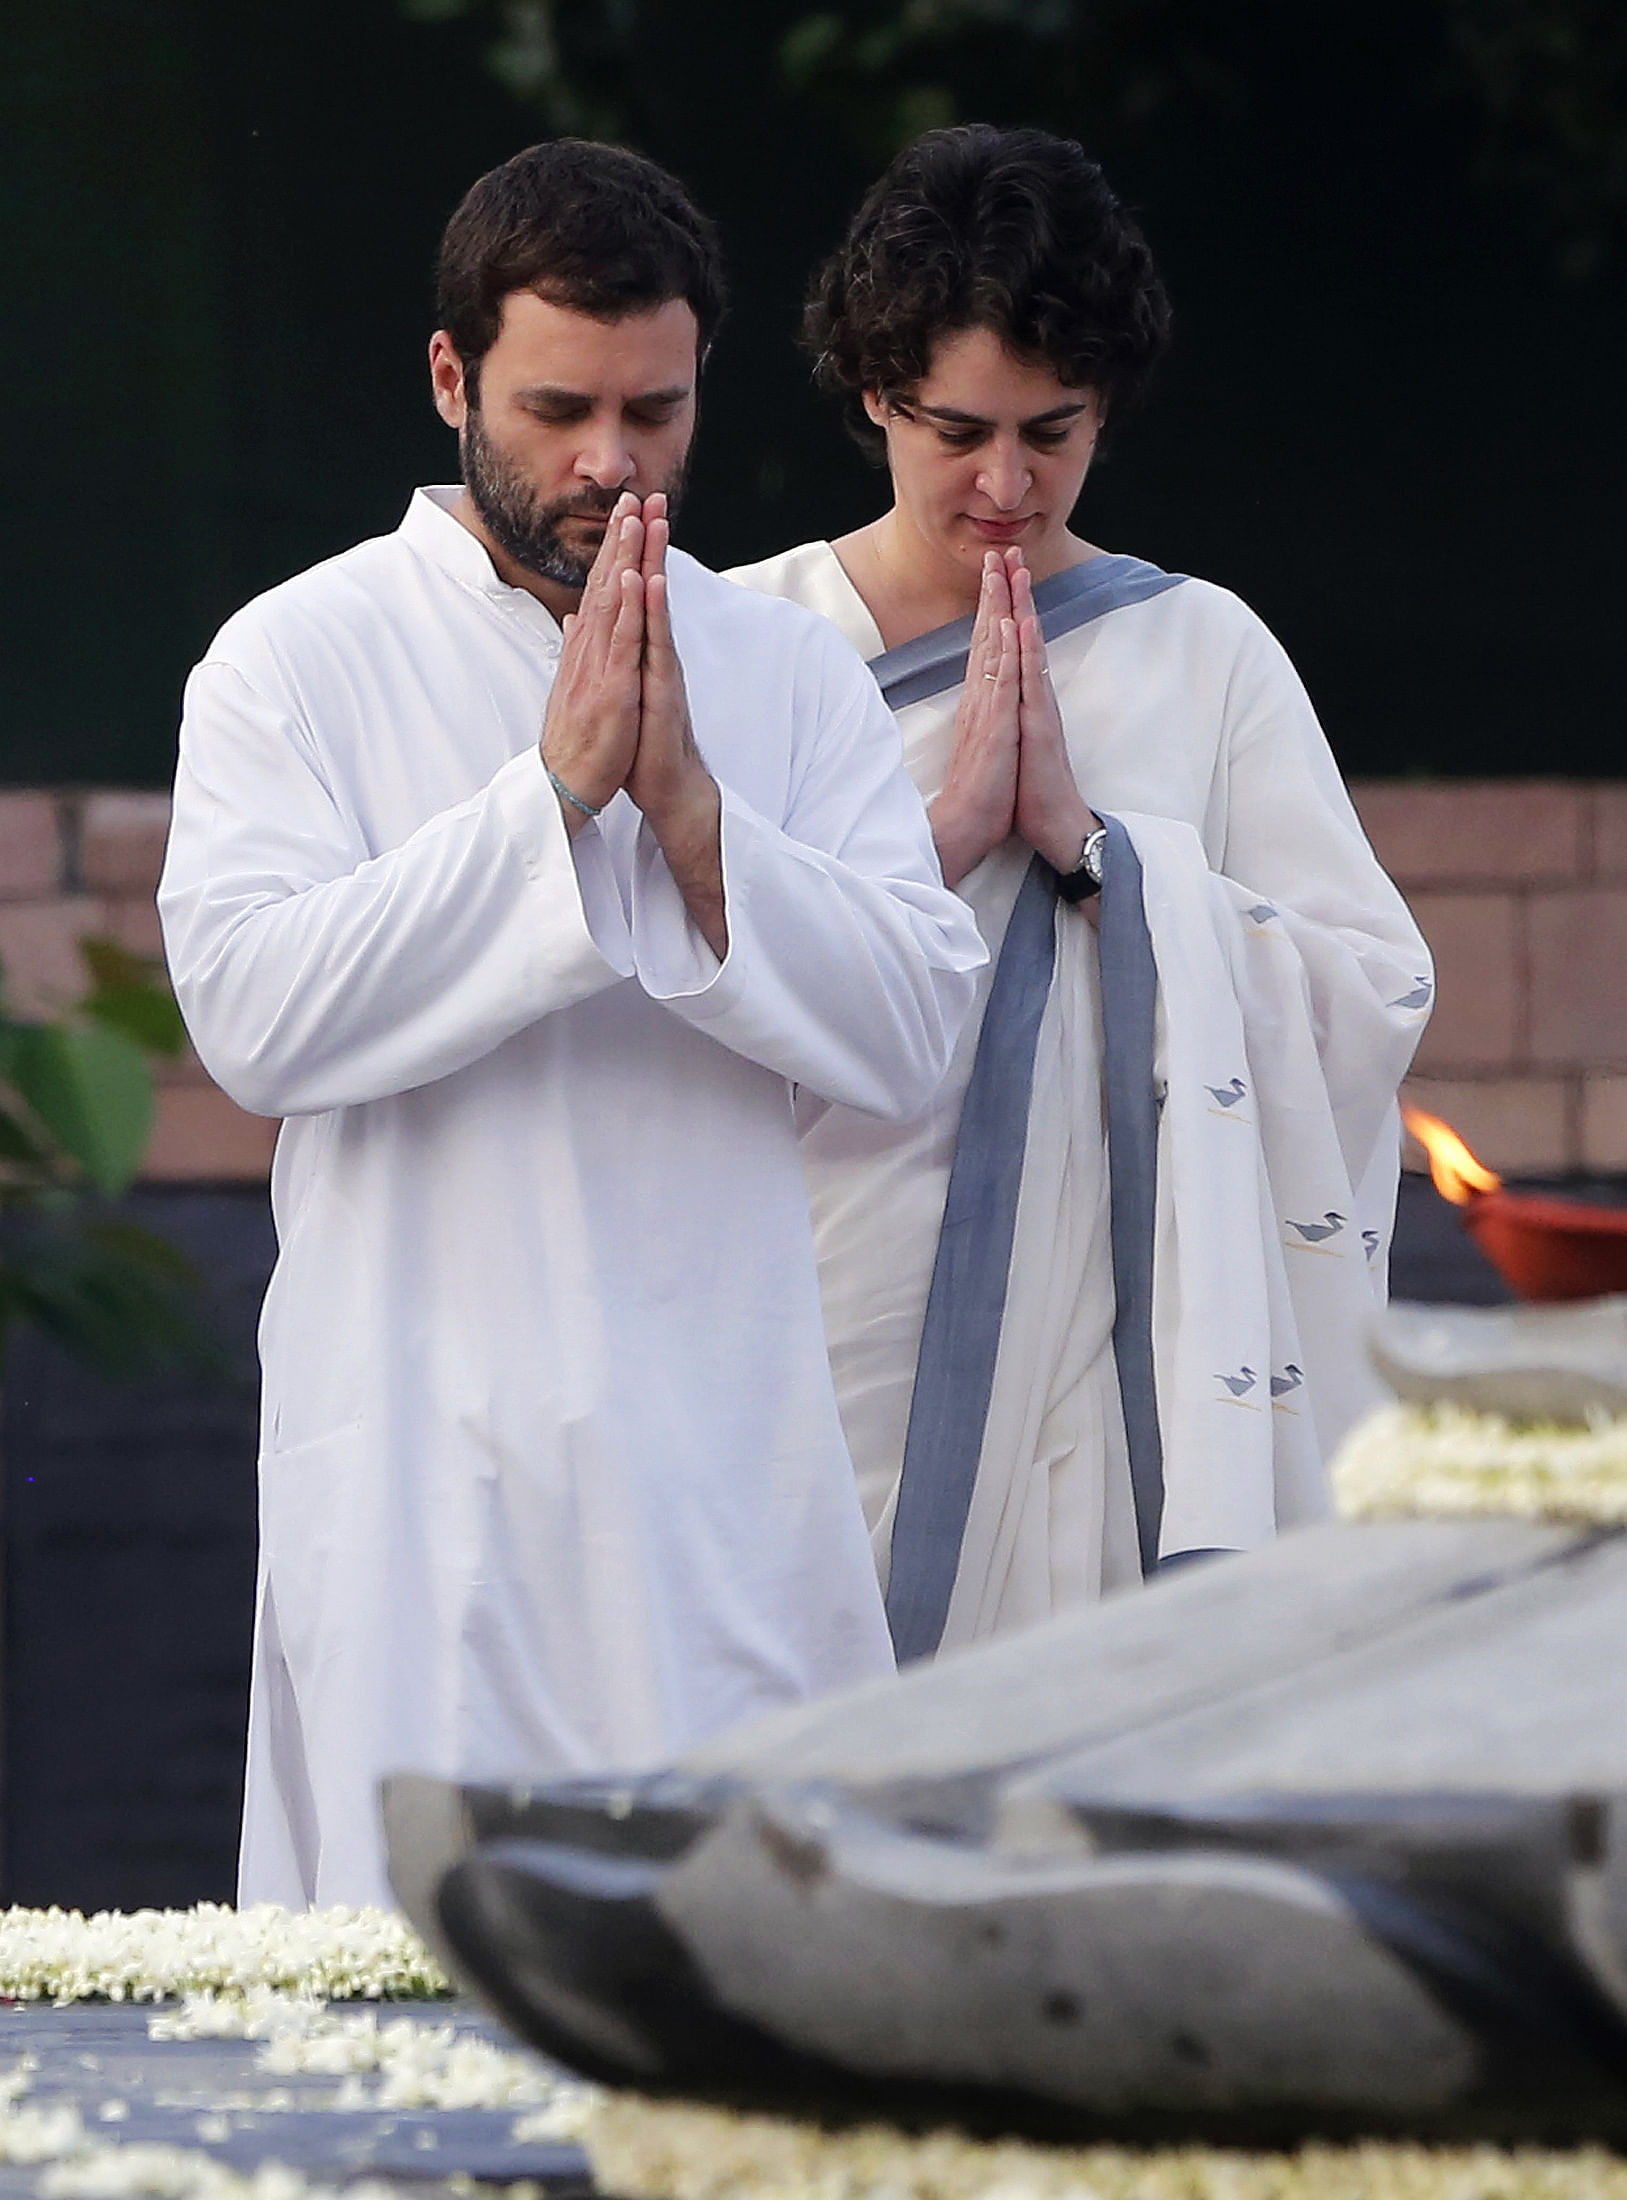 Rahul Gandhi and his sister Priyanka Gandhi Vadra pay tribute at the memorial of former prime minister Rajiv Gandhi on the occasion of the former prime minister's 69th birth anniversary, in New Delhi on August 20, 2013. Reuters file photo.